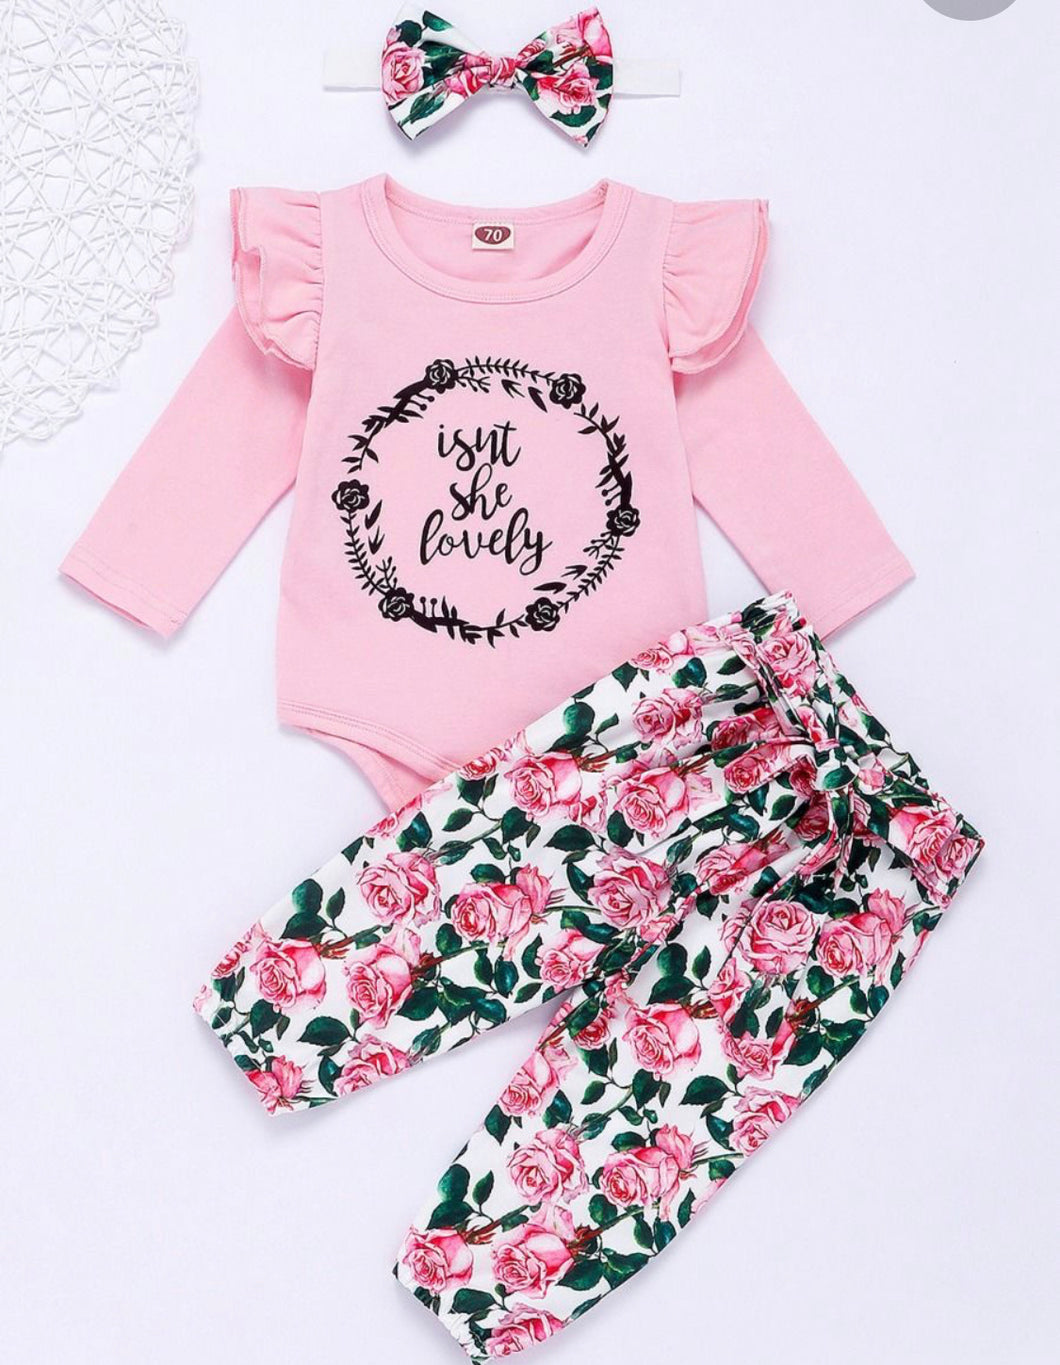 “Isn’t she lovely” three piece set- pink